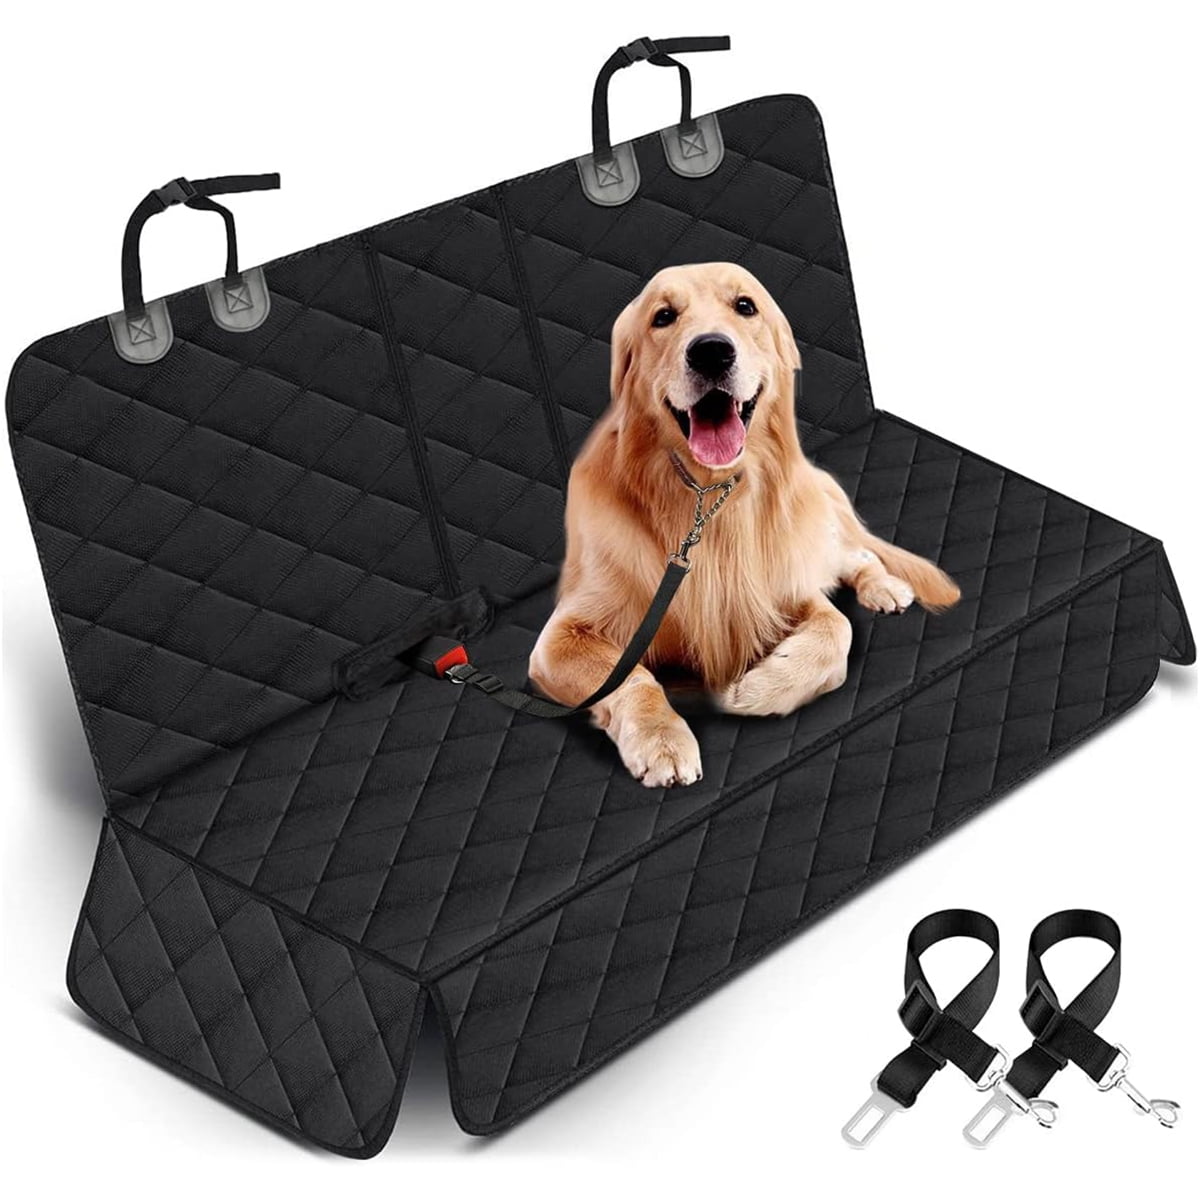 Portable Pet Dog Car Seat Central Control Nonslip Dog Carriers Safe Car  Armrest Box Booster Kennel Bed For Small Dog Cat Travel 